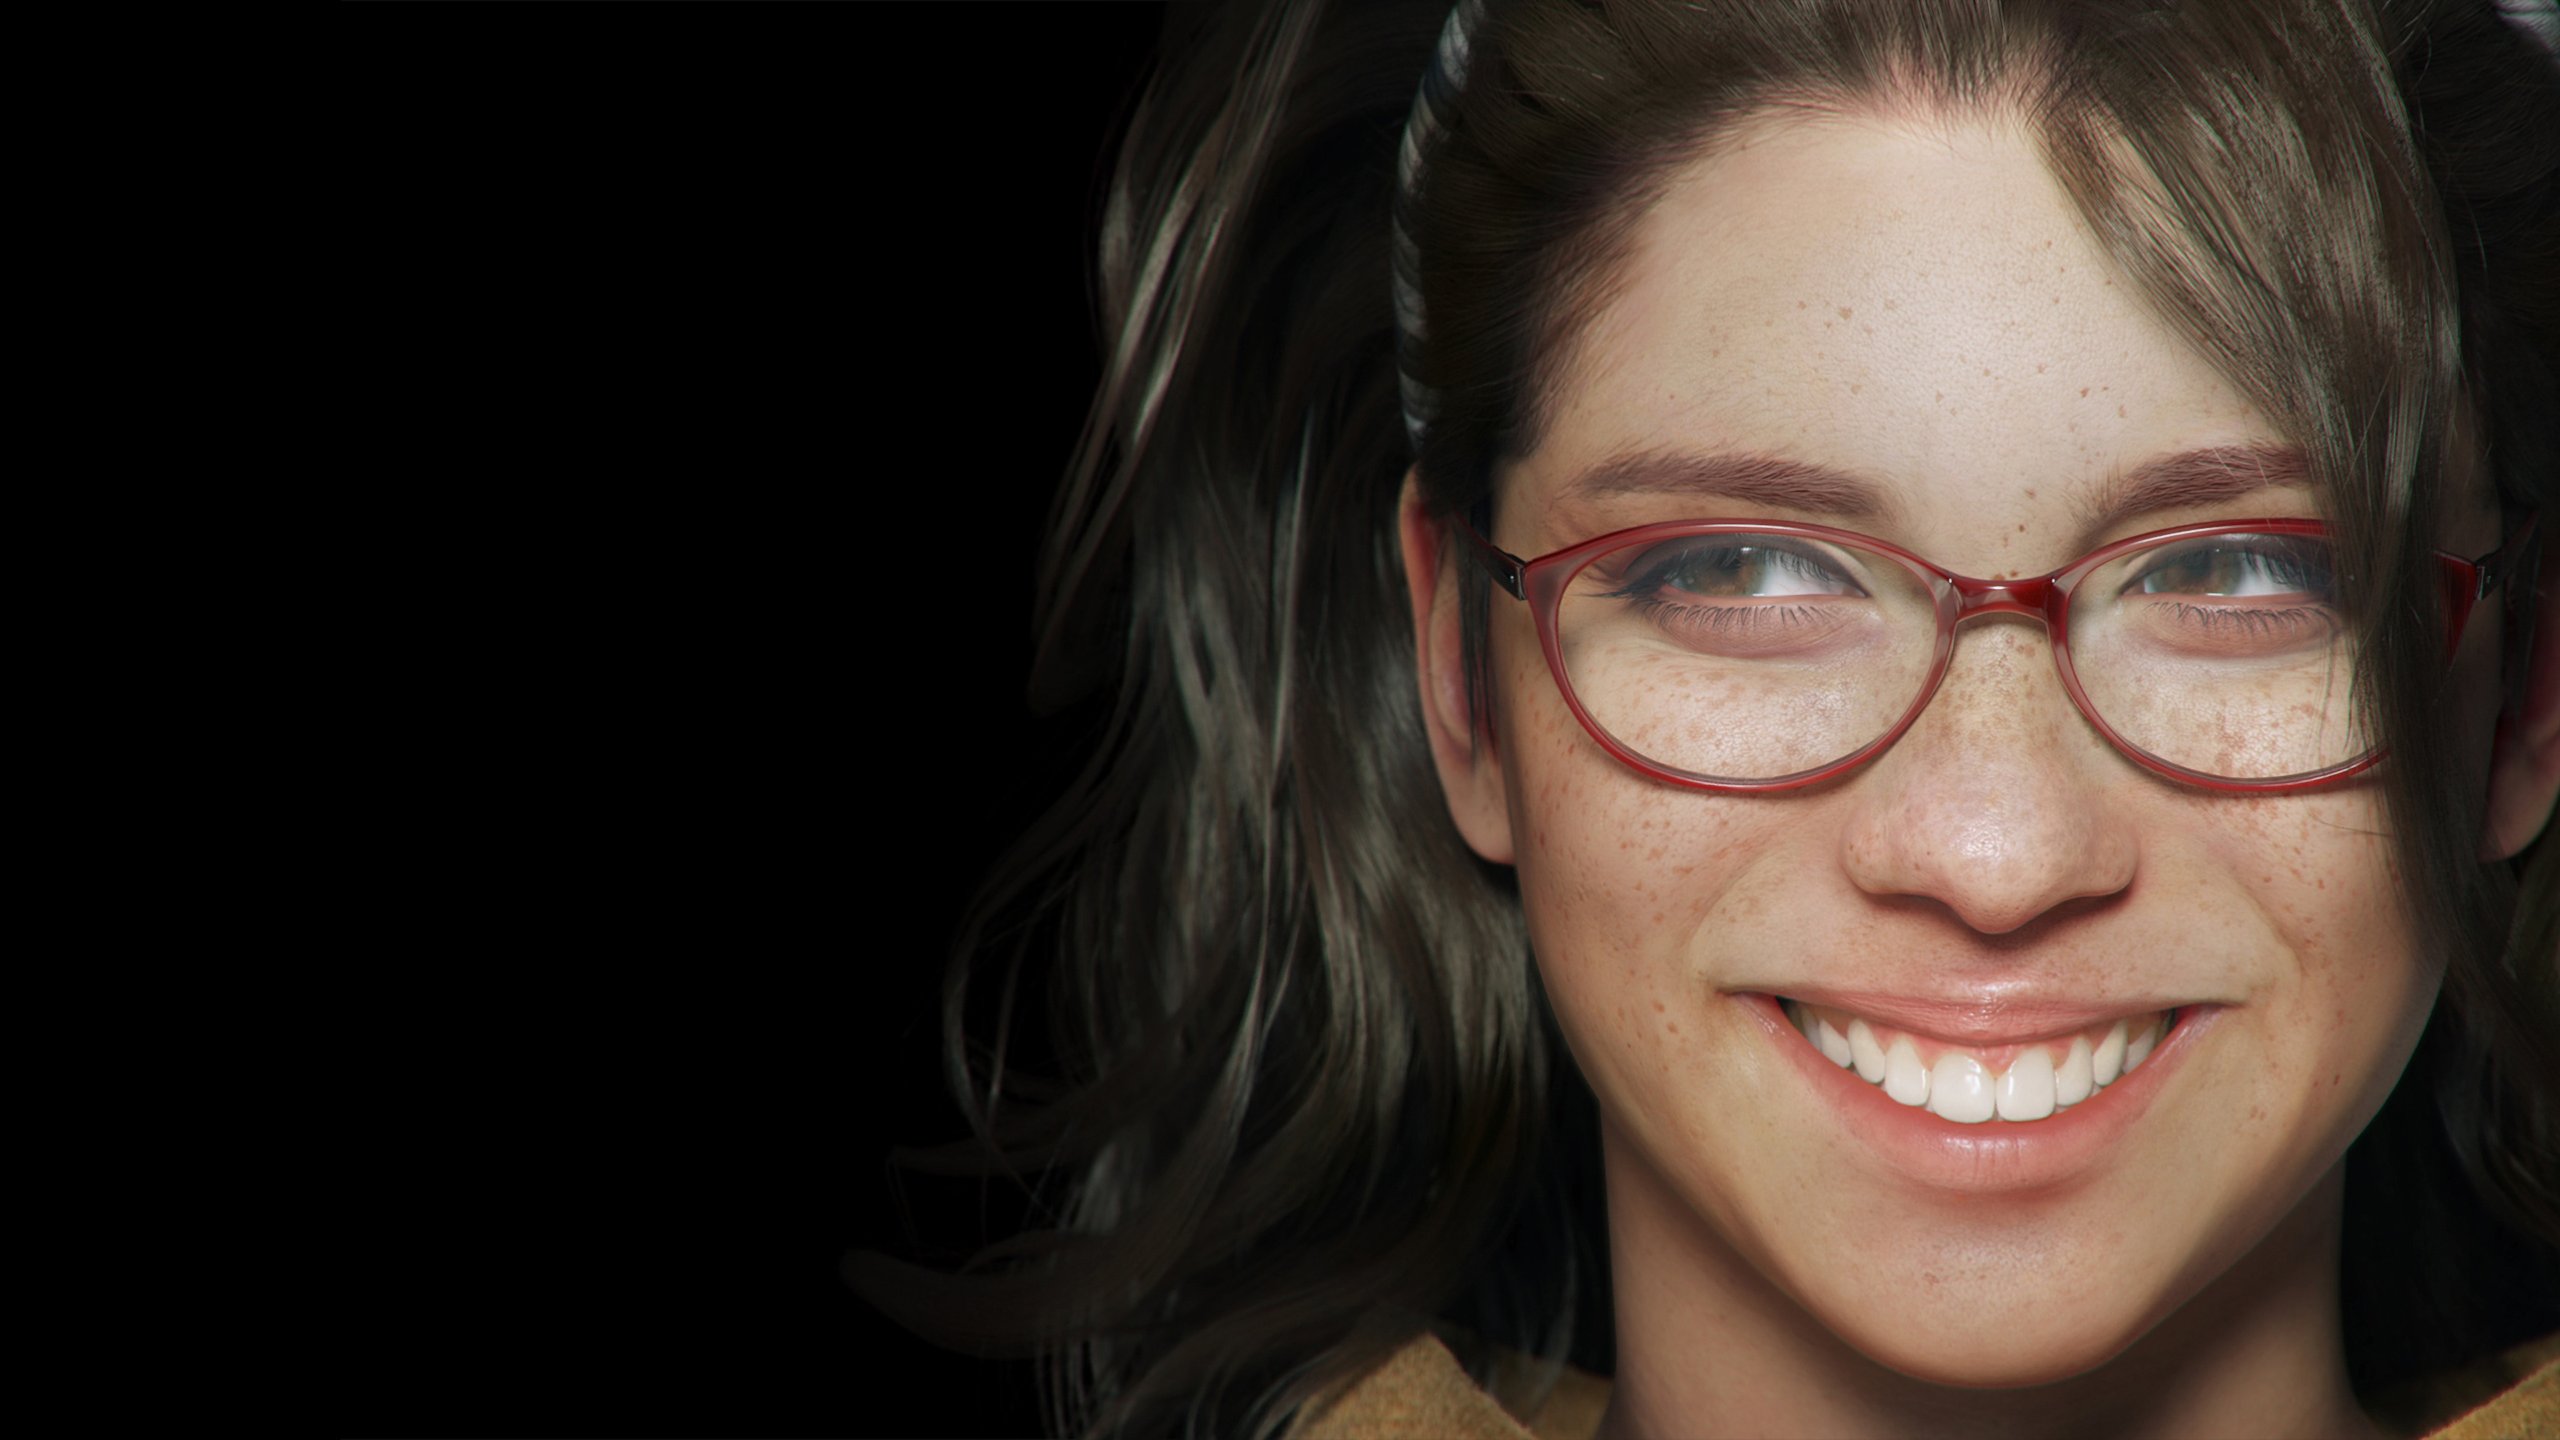 Devil May Cry 5 Brunette Women With Glasses Black Background Video Games Freckles Nico Devil May Cry 2560x1440